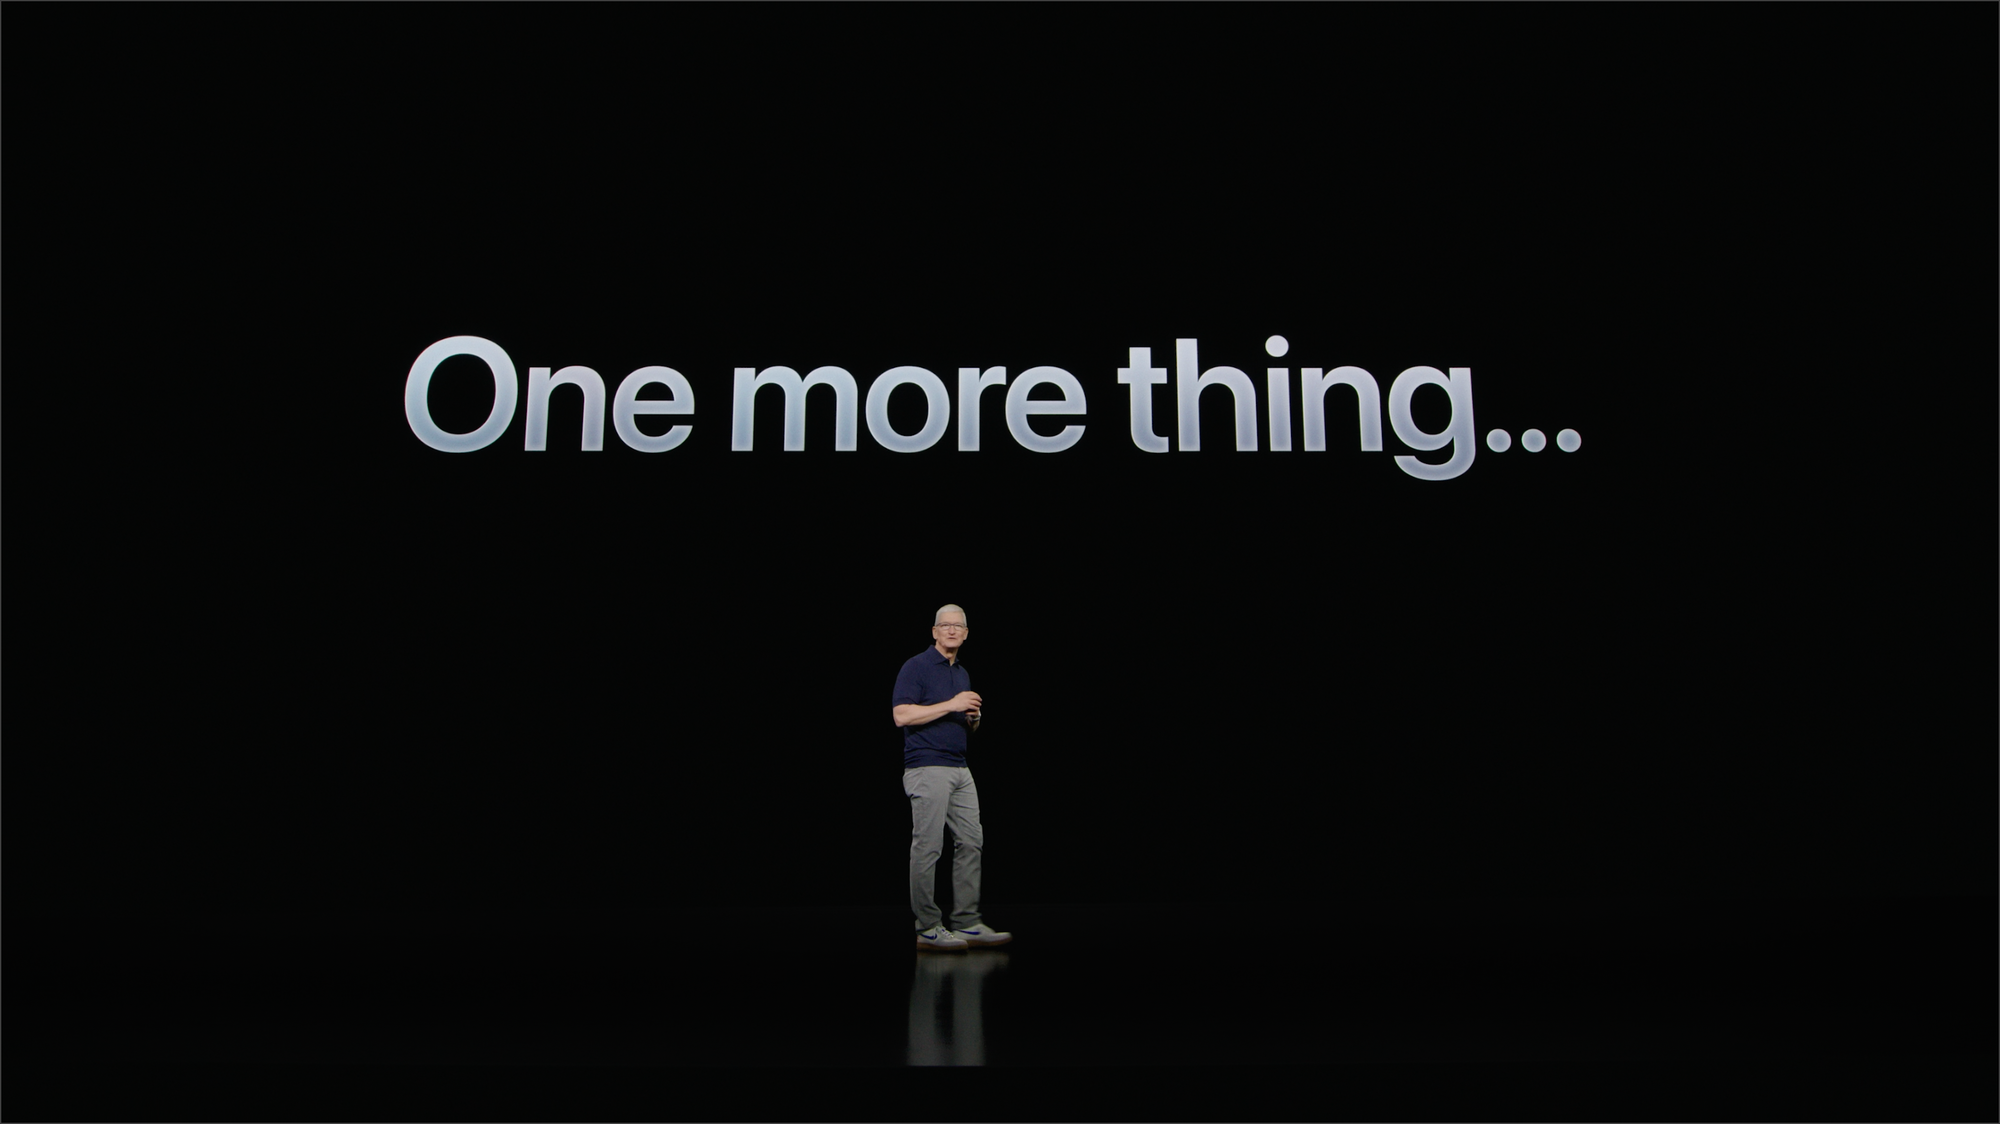 Tim Cook announced the “One more thing” everyone was waiting for